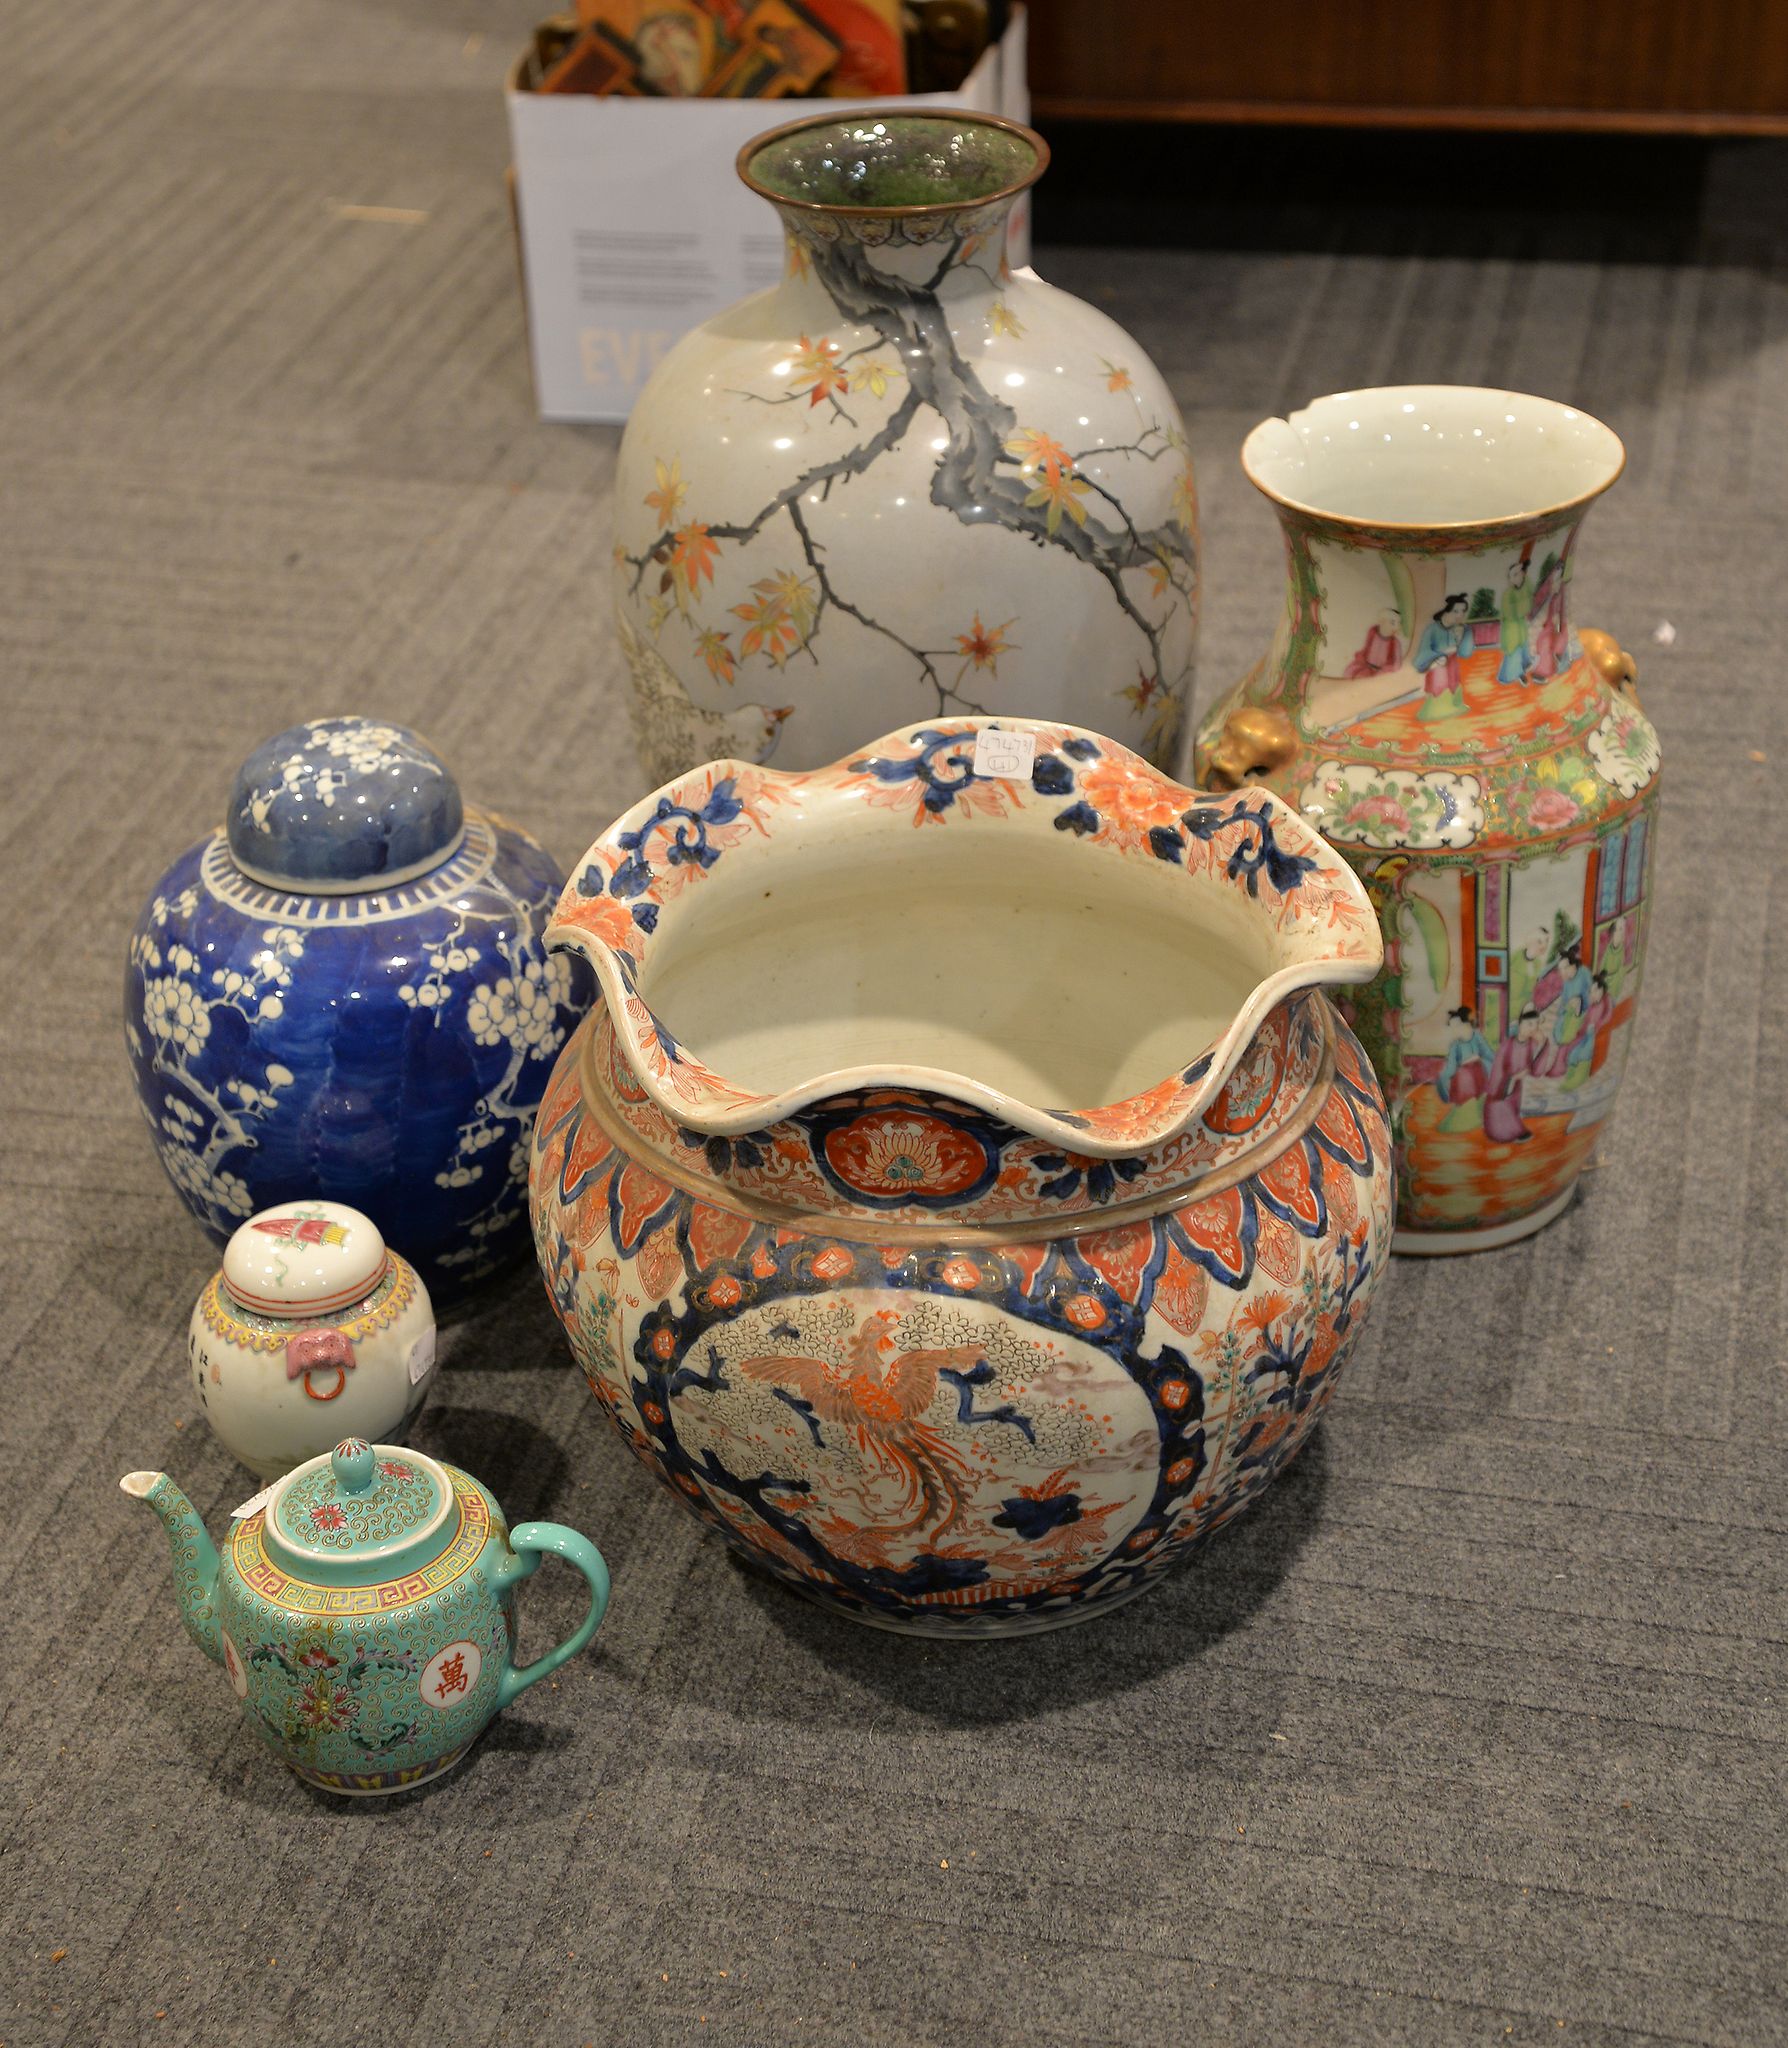 A quantity of Chinese and Japanese porcelain, pottery and cloisonne